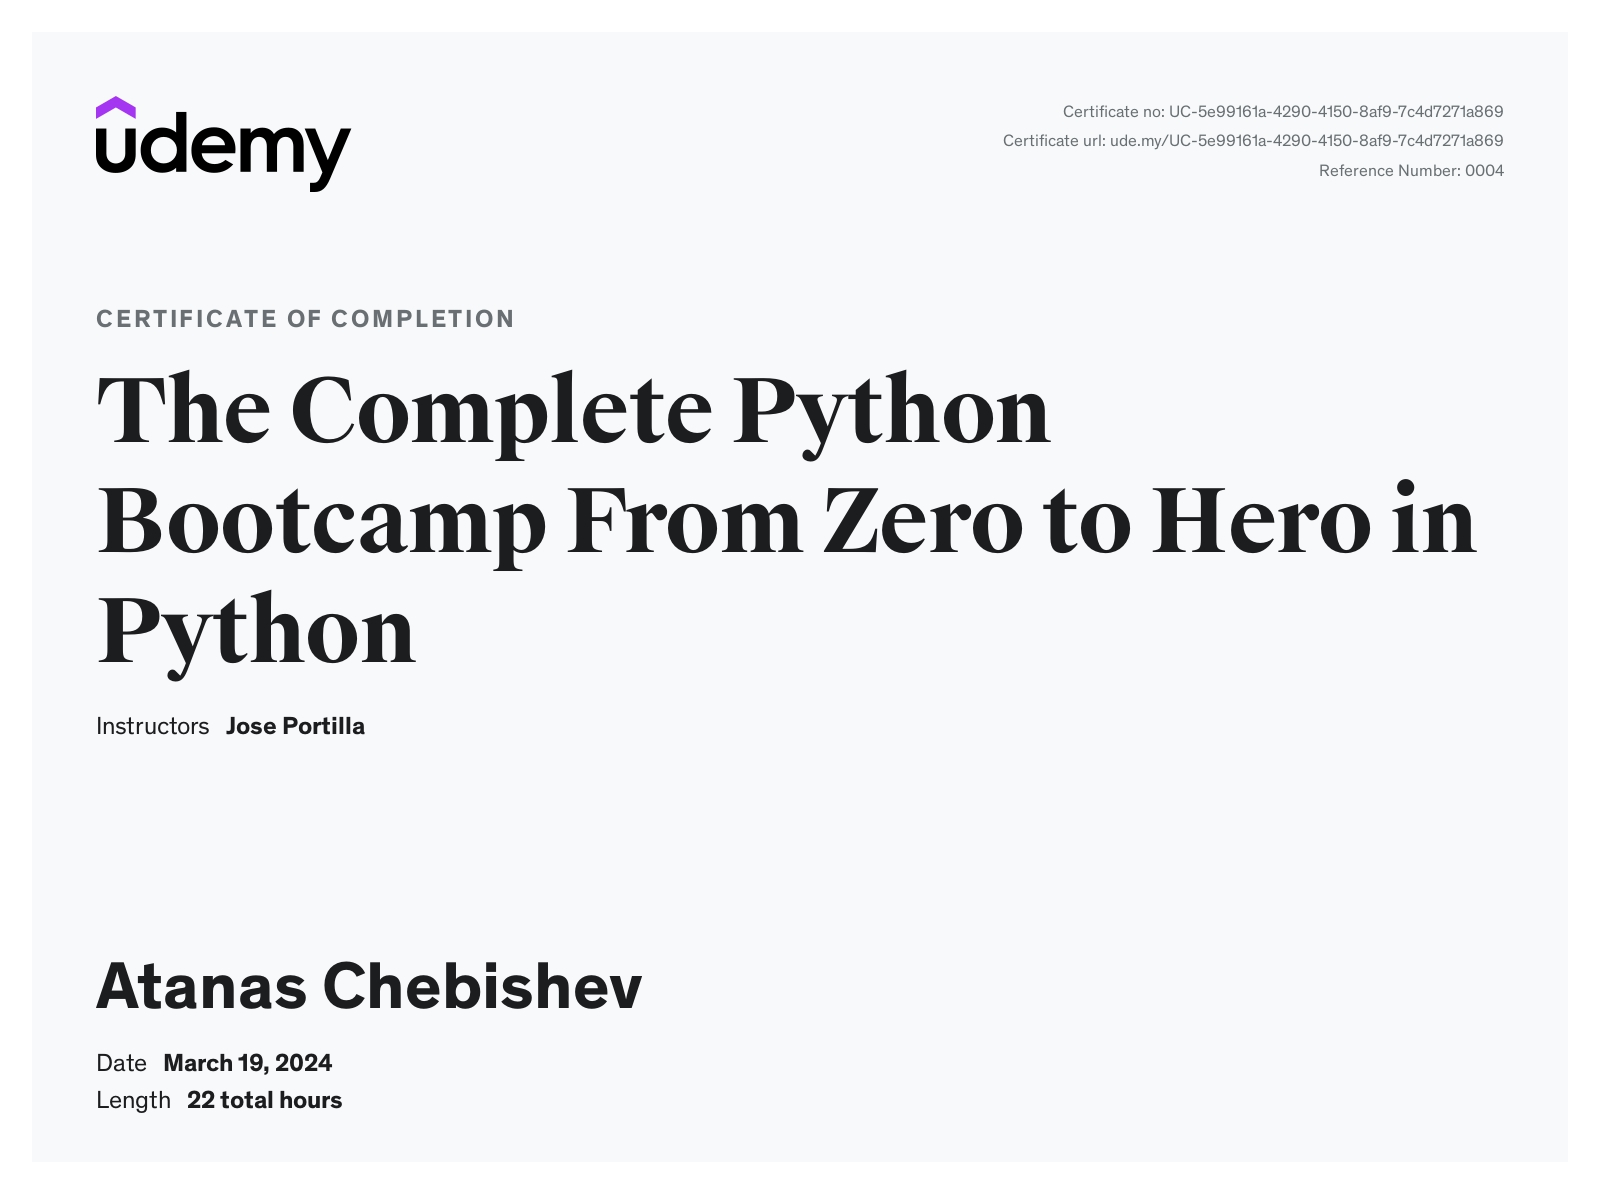 Udemy - The Complete Python Bootcamp From Zero to Hero in Python